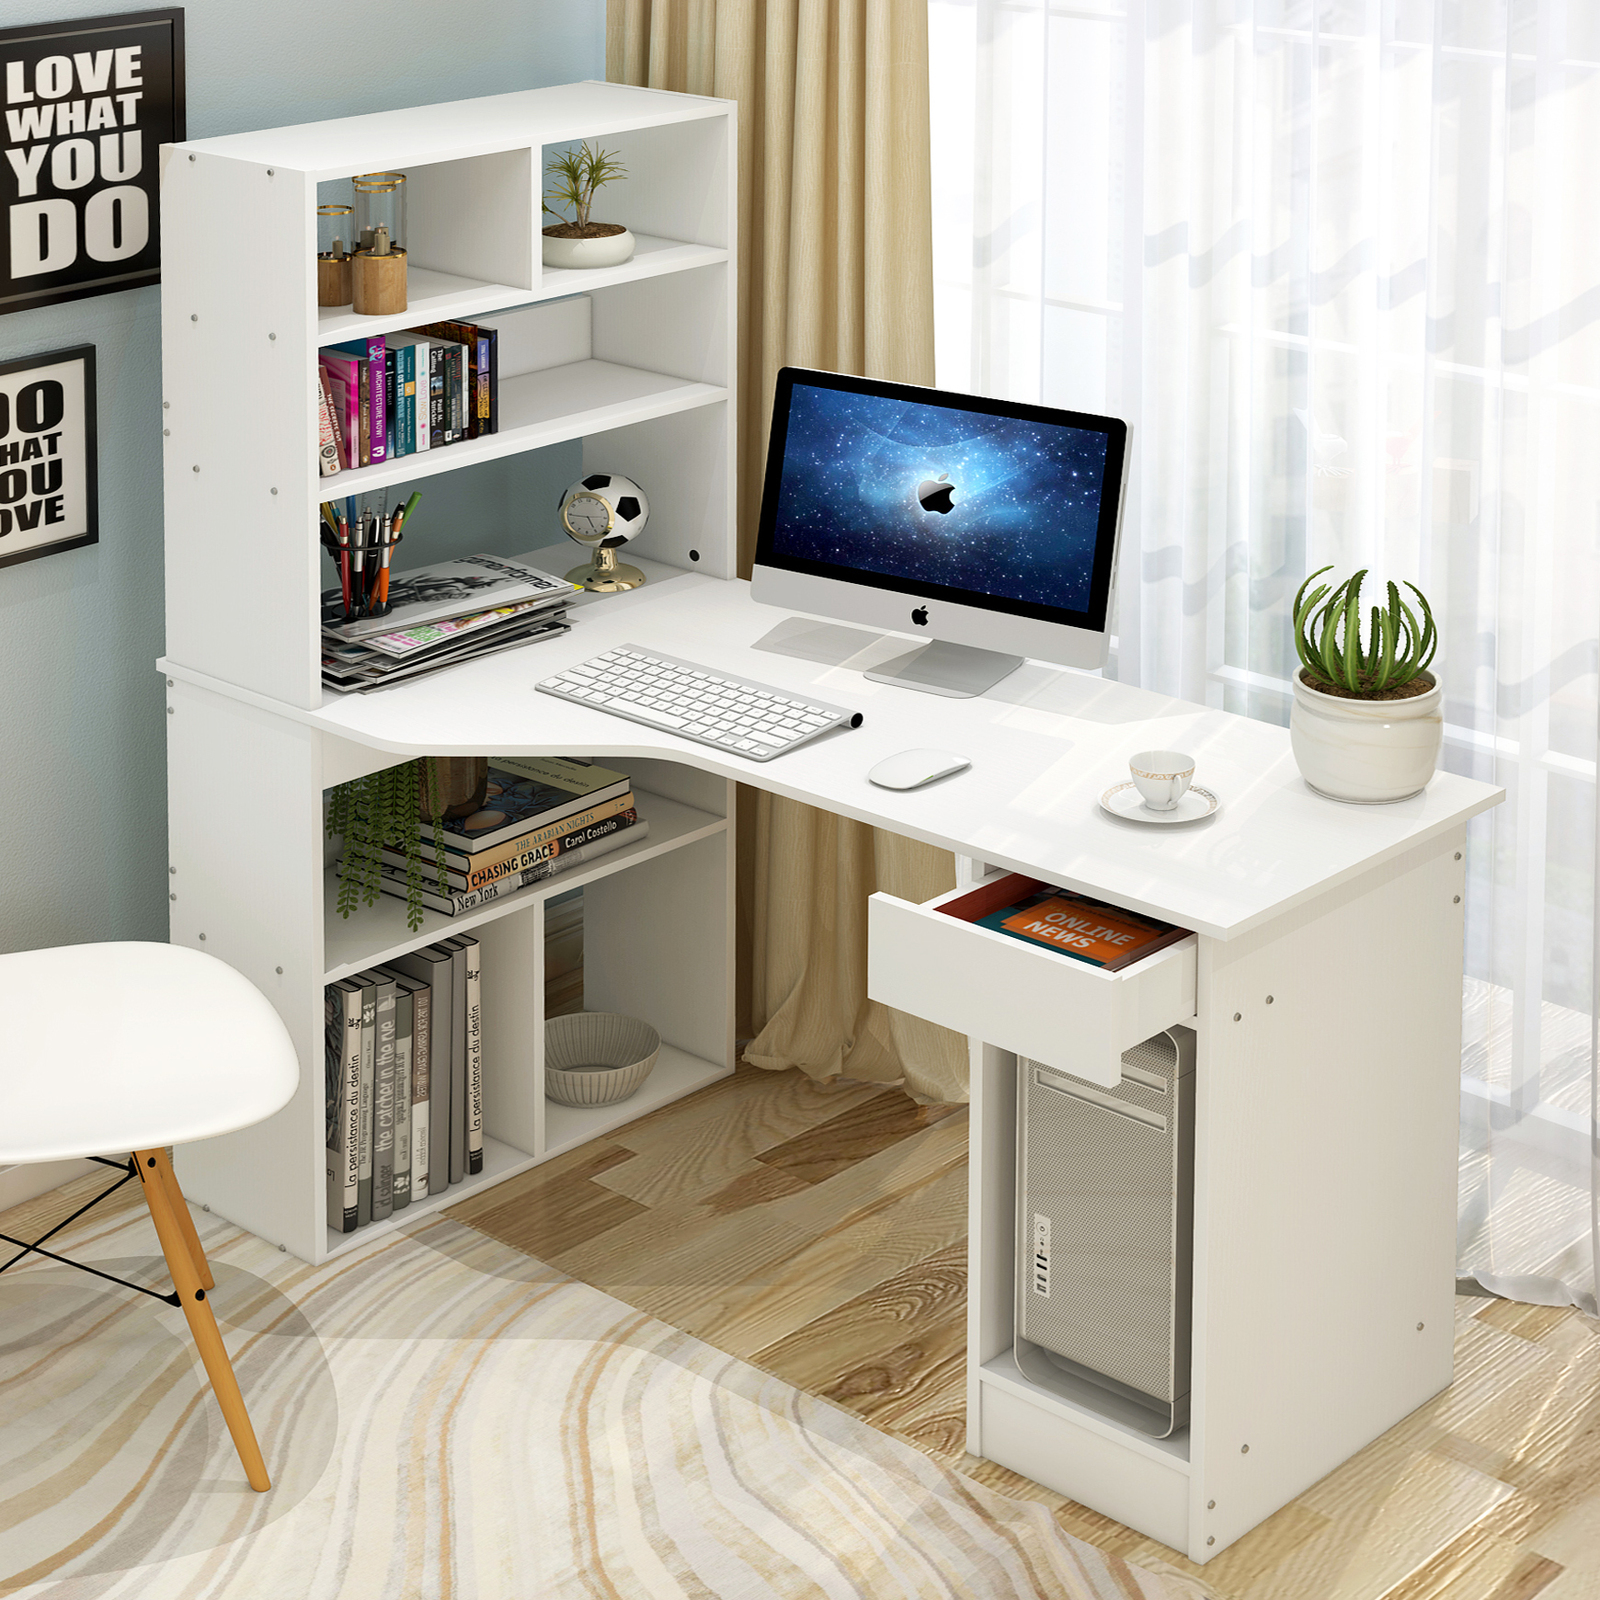 Storage Shelving Book Shelf, Office Desk With Bookcase And Shelving